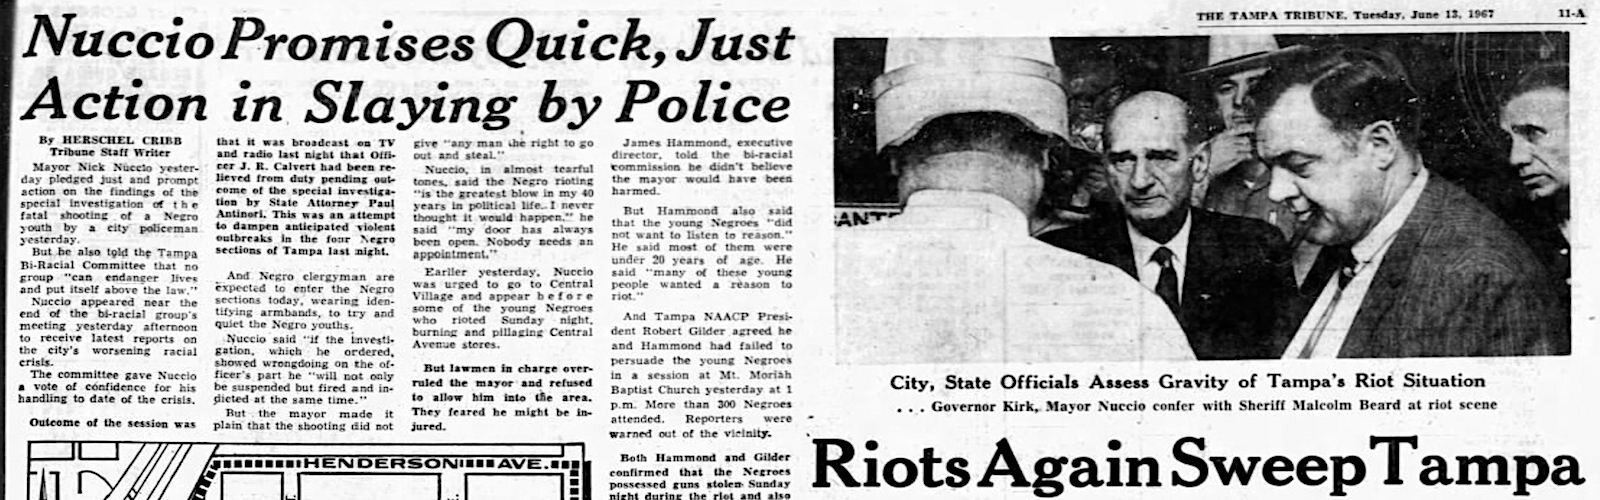 The Tampa Tribune reports on June 1967 riots in Tampa.